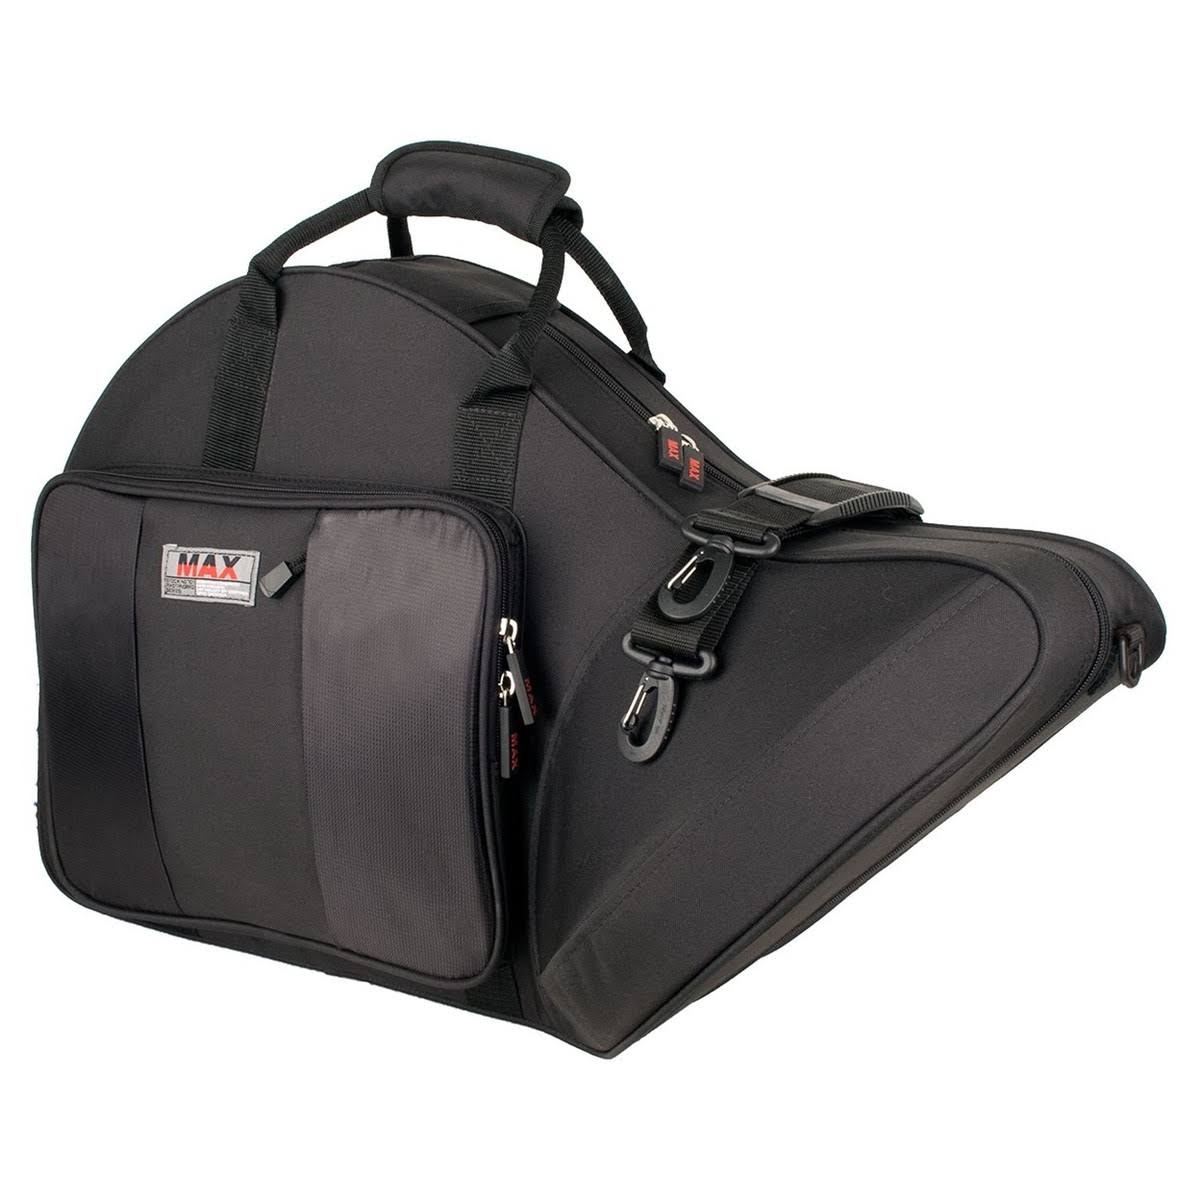 Protec MX316CT Max Contoured French Horn Case - Black